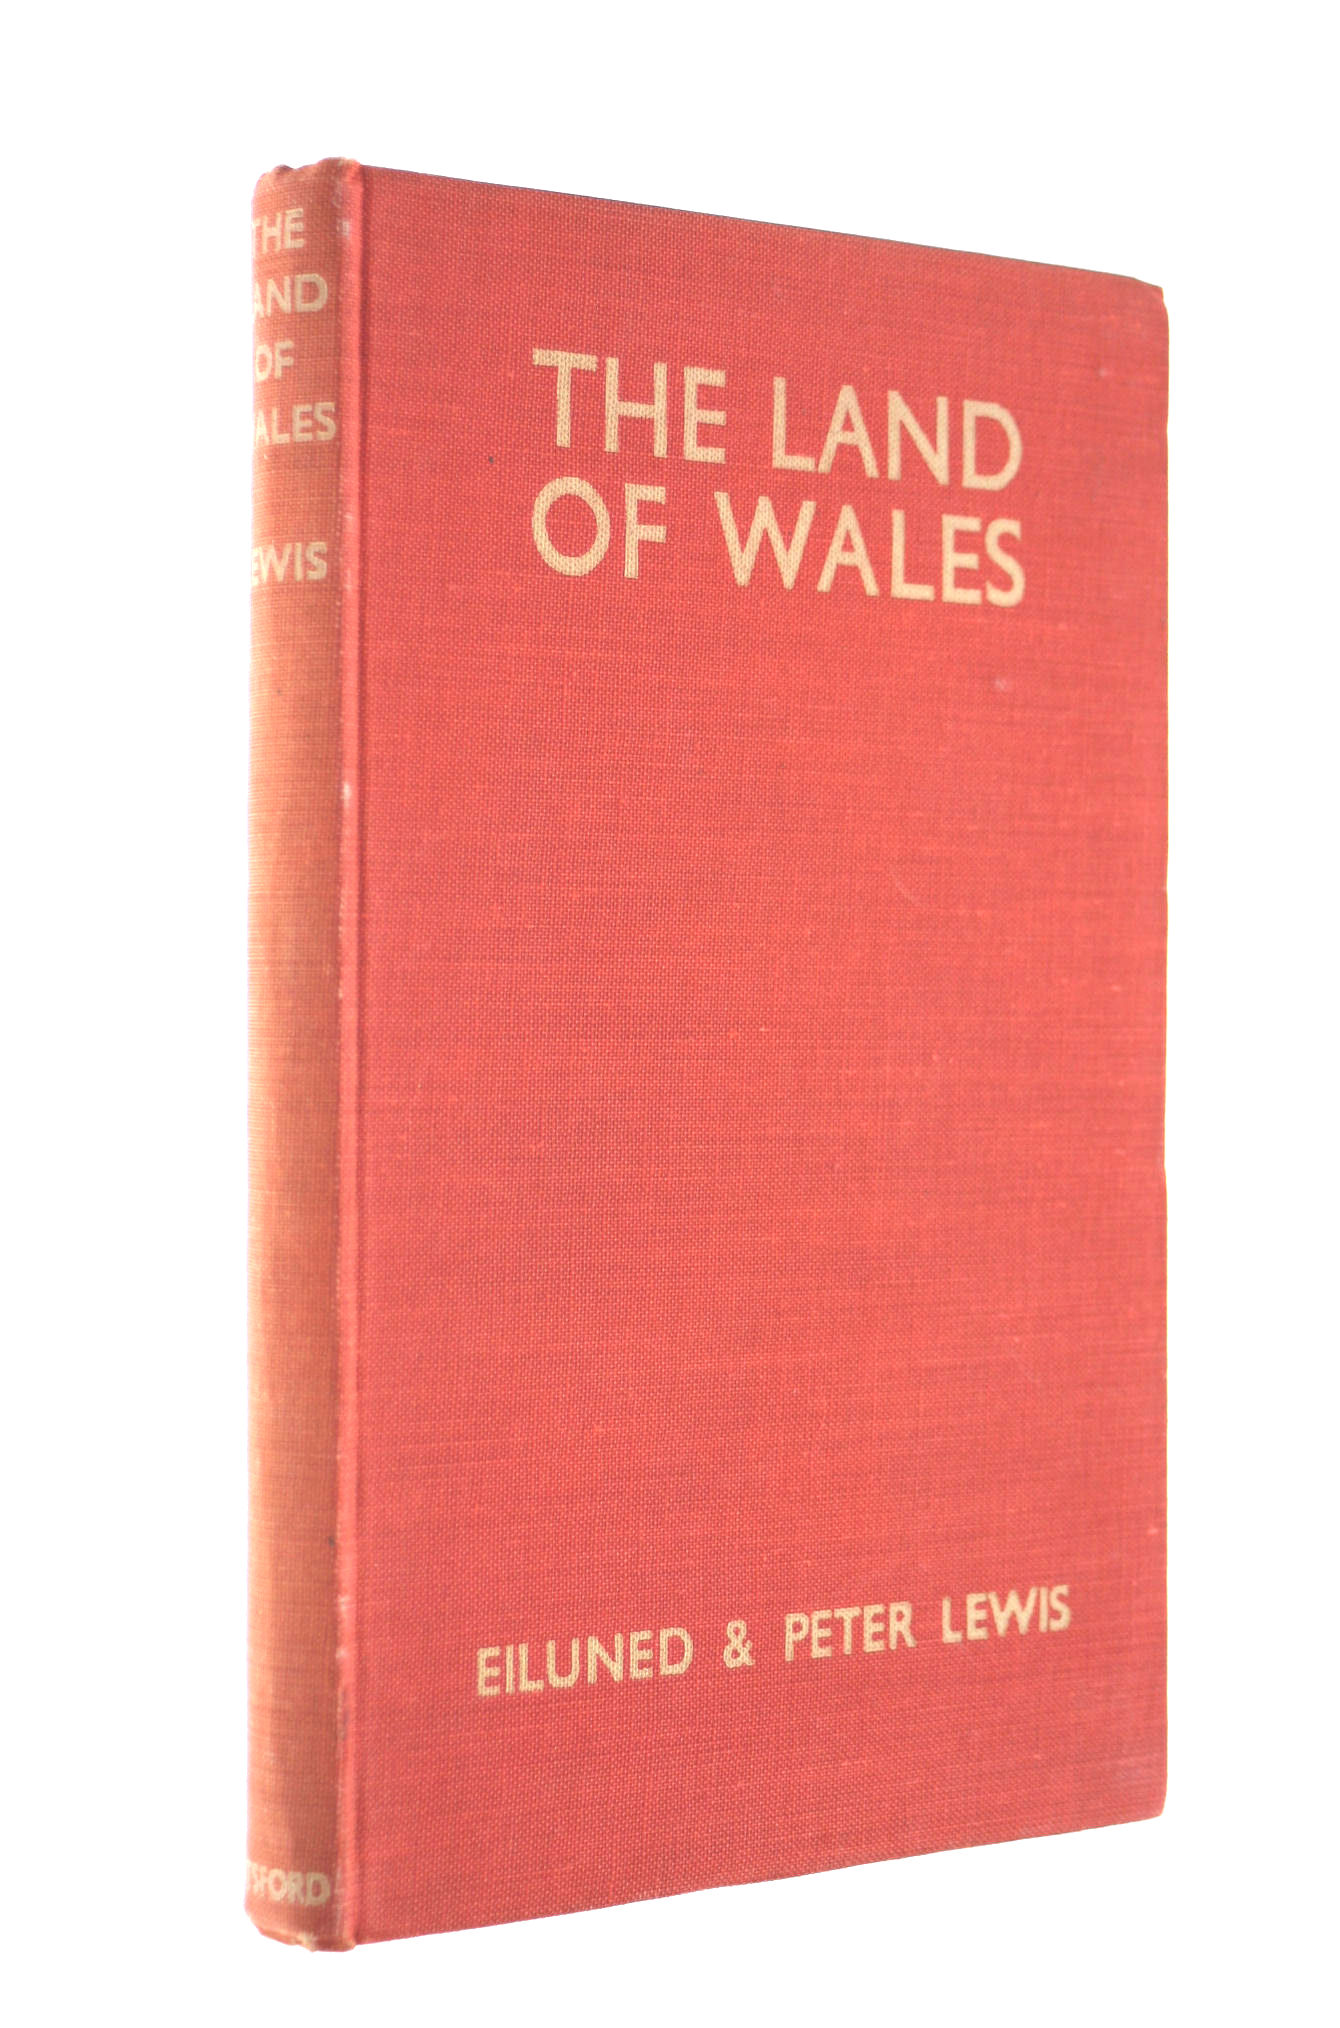 EILUNED & PETER LEWIS - The Land of Wales.